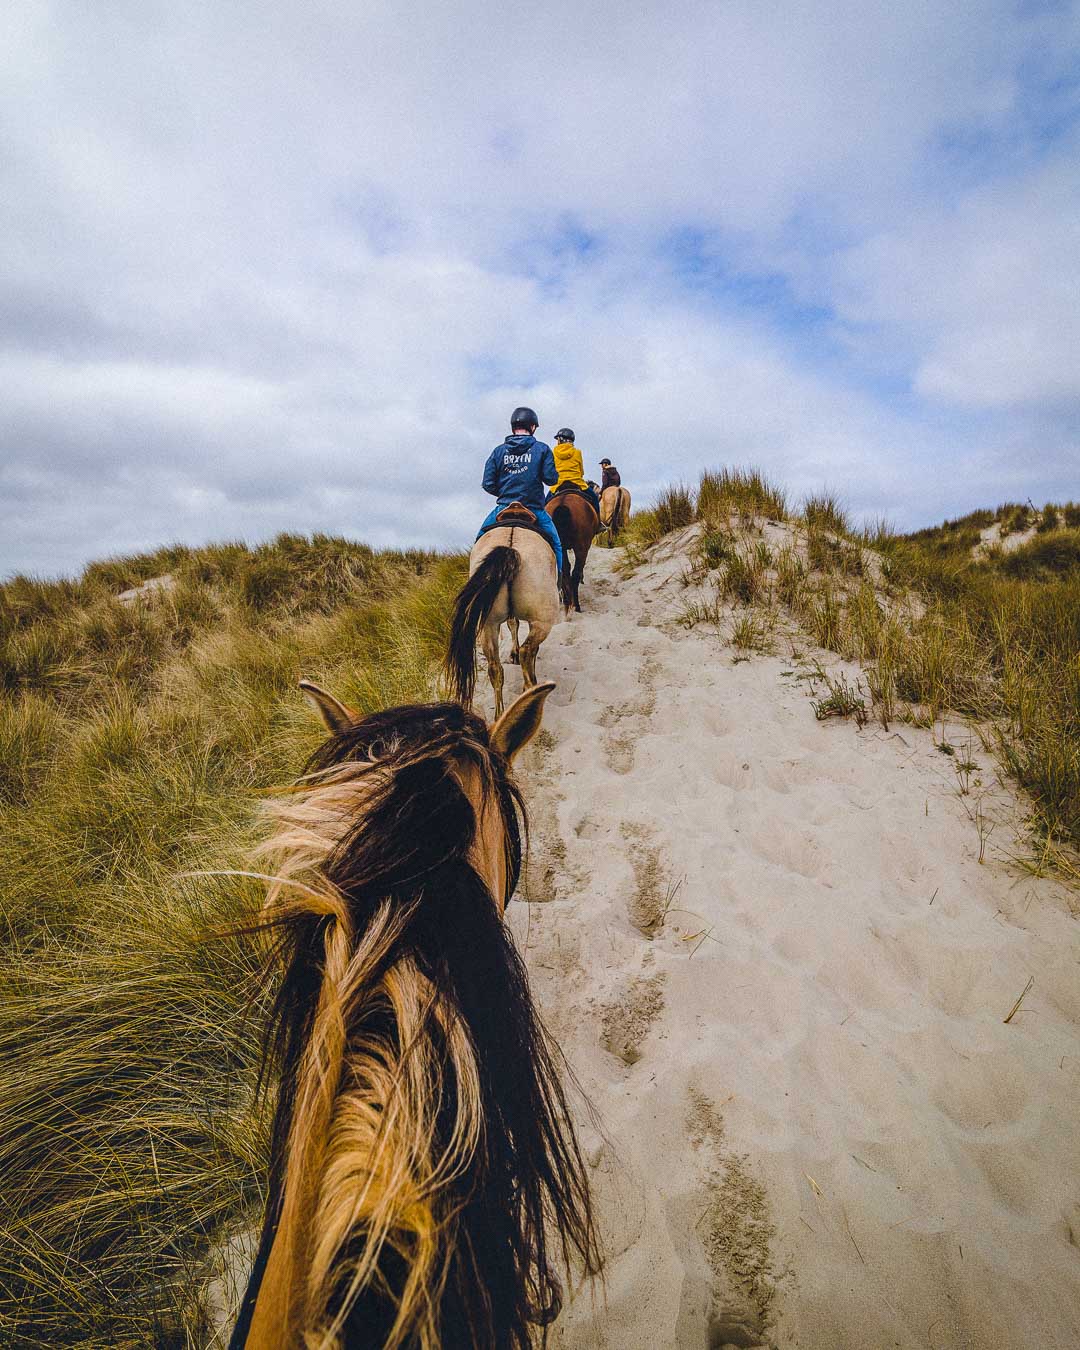 going up the sand dunes